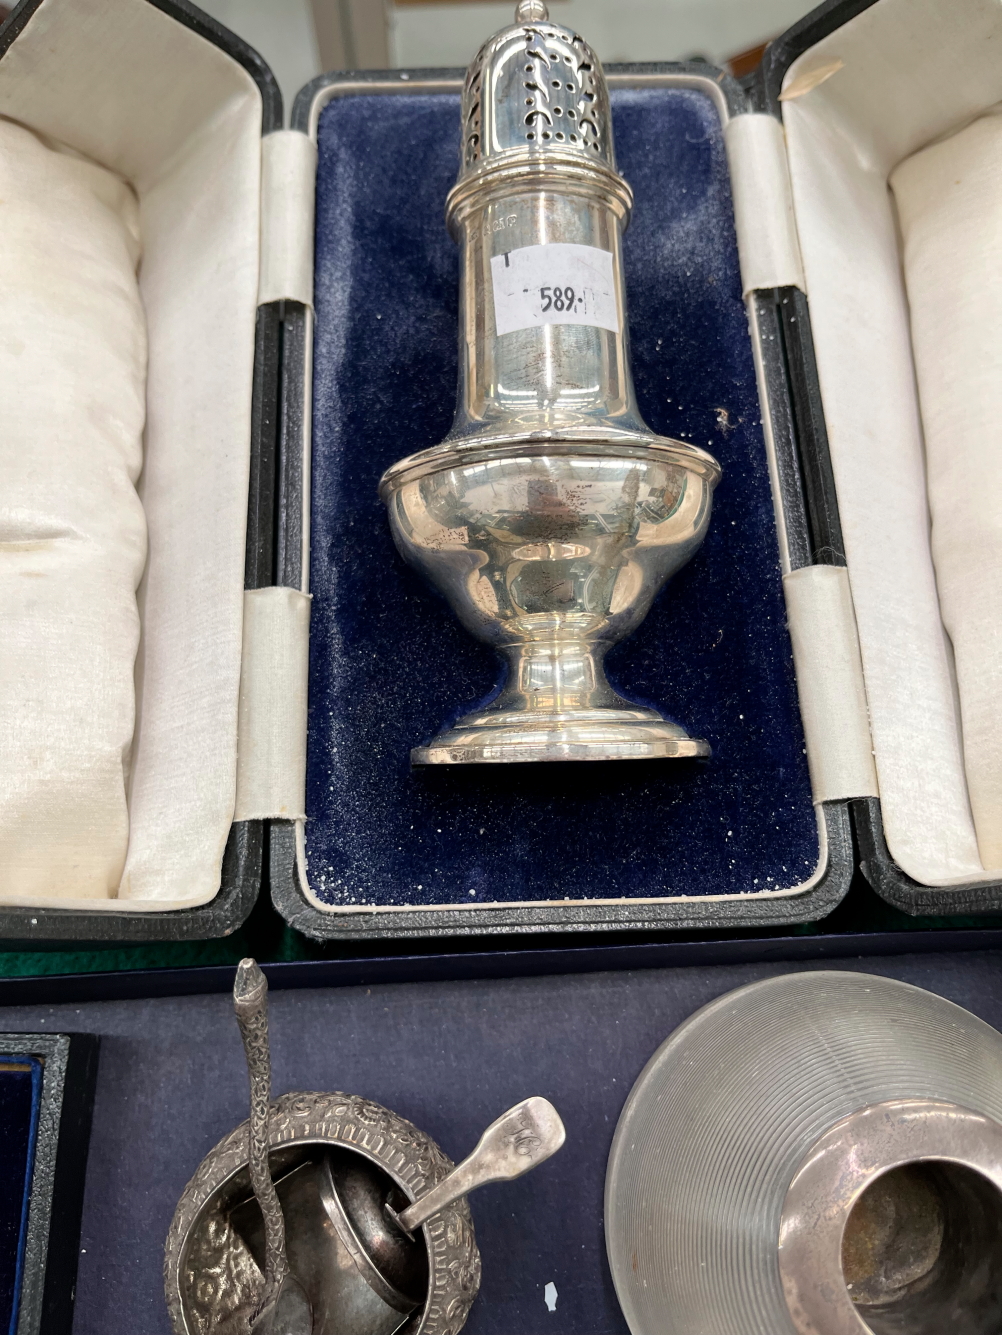 BOXED SILVER WARES INCLUDING NAPKIN RINGS, A SUGAR CASTER, COFFEE SPOONS TOGETHER WITH A GLASS - Image 3 of 5